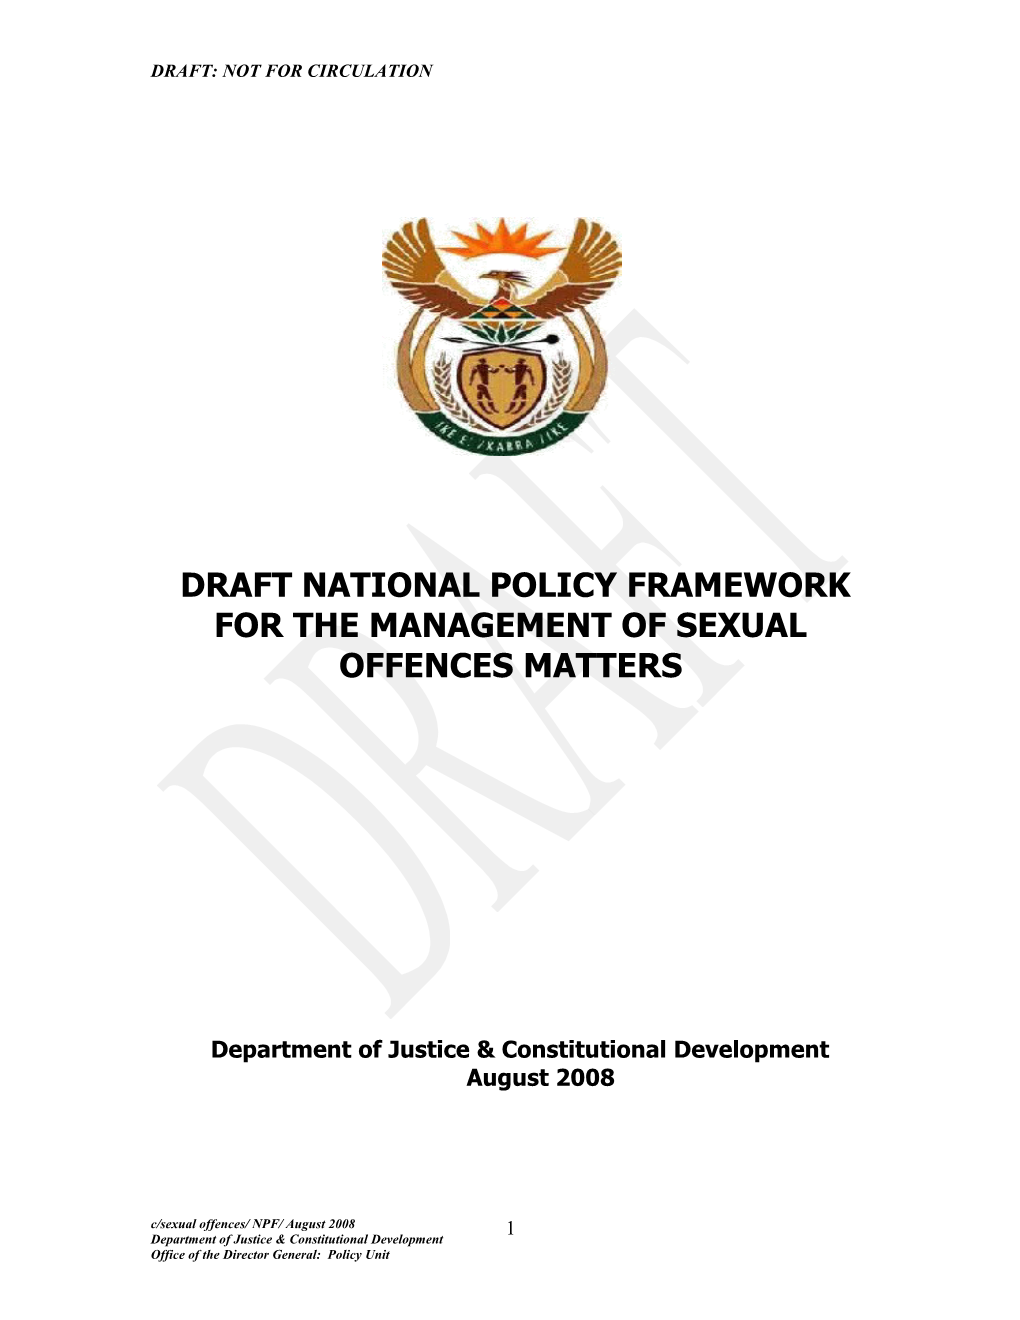 The National Policy Framework